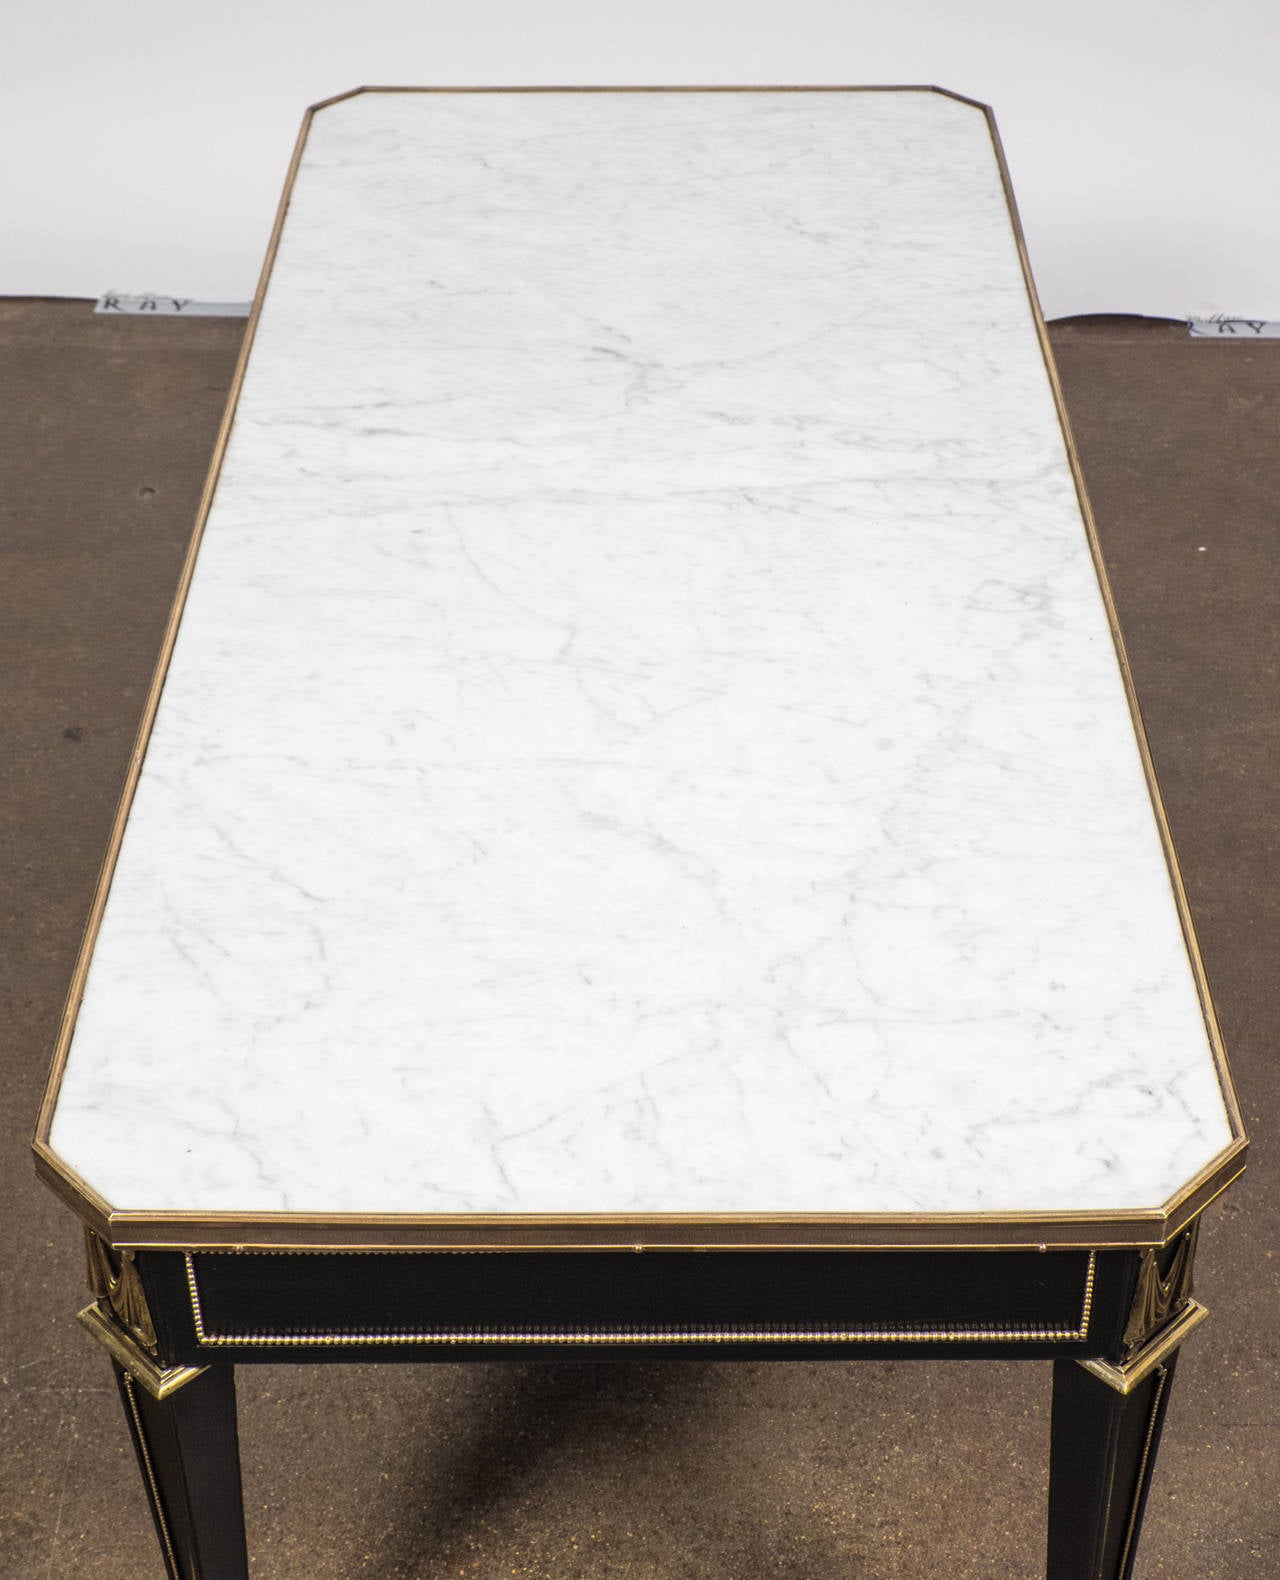 Vintage French Directoire style coffee table in ebonized mahogany with a lustrous French polish, Carrara marble top, and gilt bronze trims.